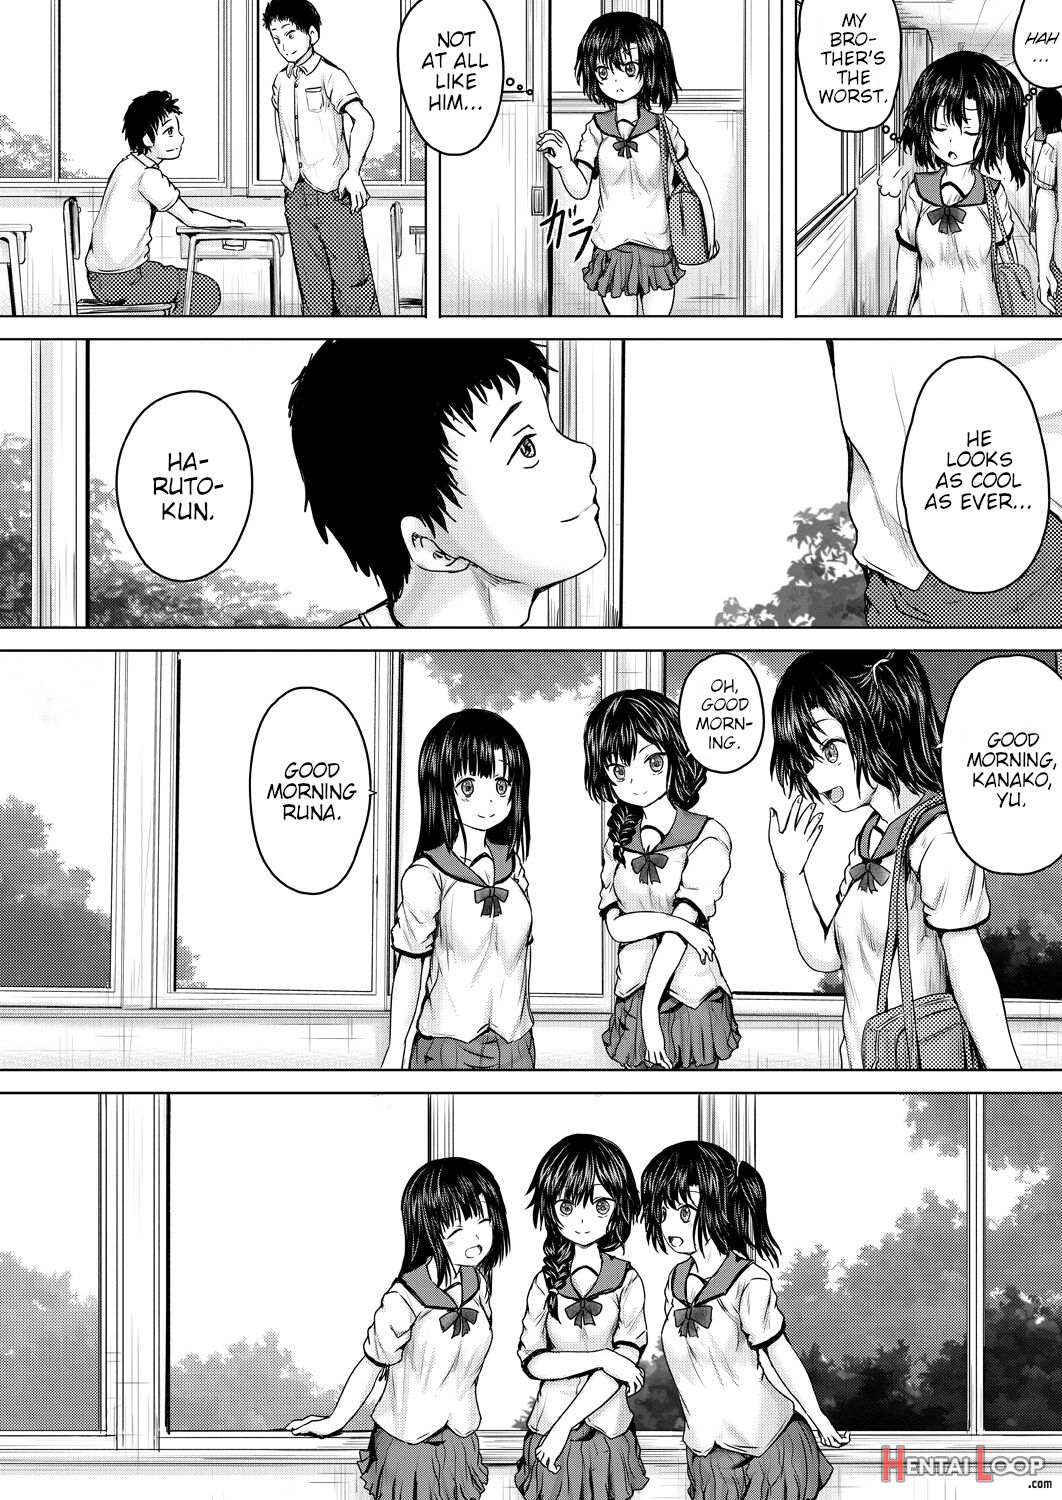 Leave It To Onii-chan Chapters 1-4 page 10